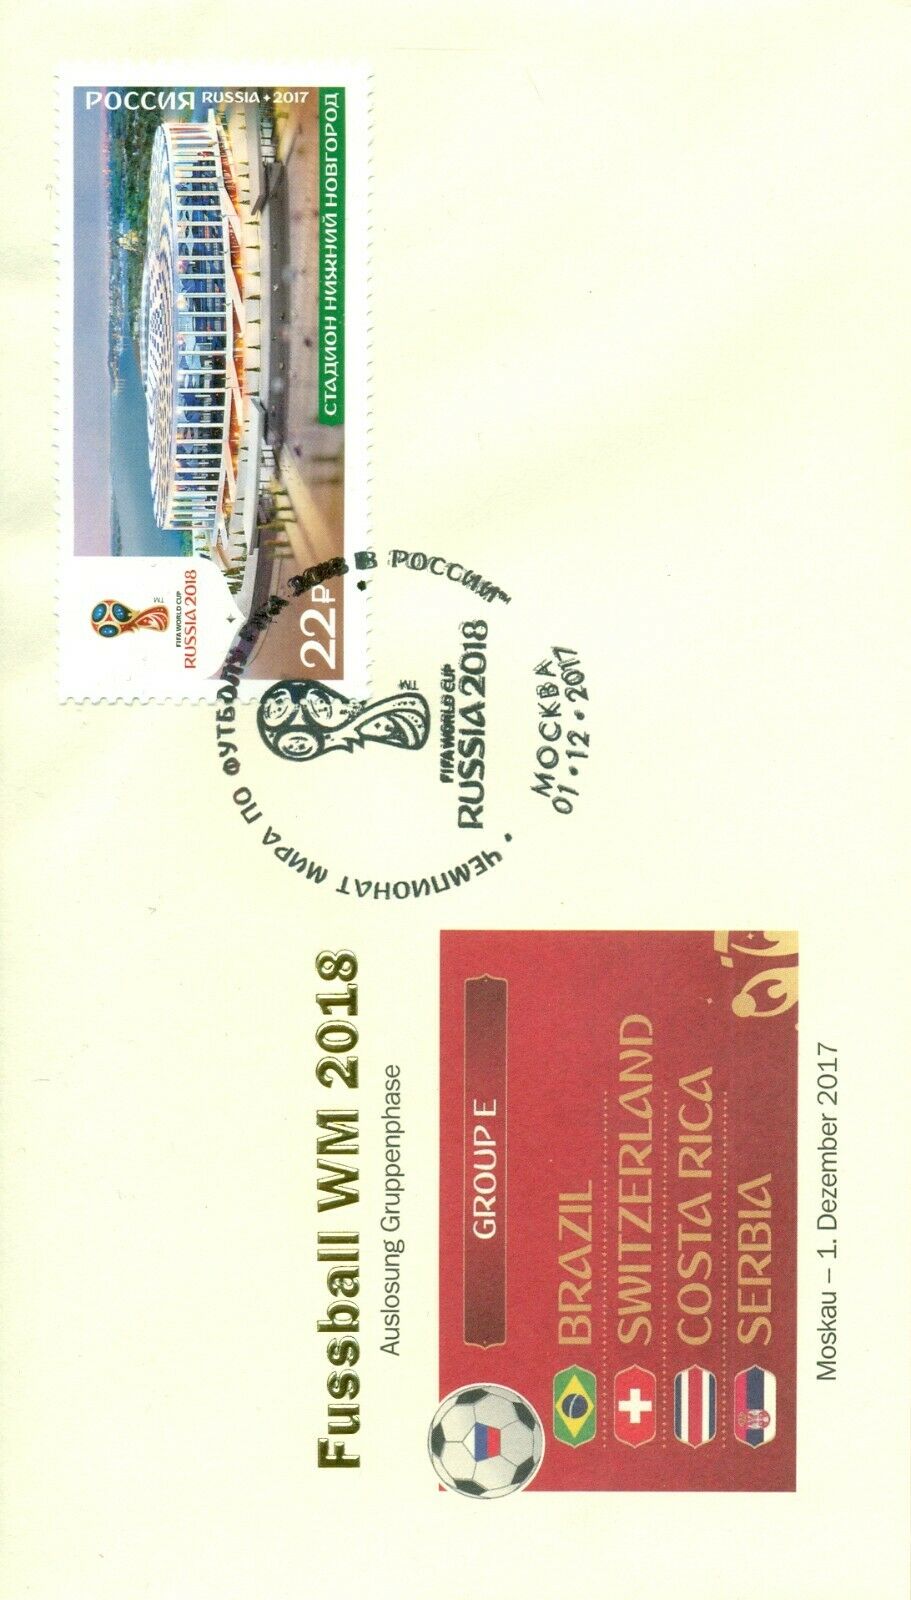 Russia, World Cup 2018, Group "e", Fdc, Lot # 99